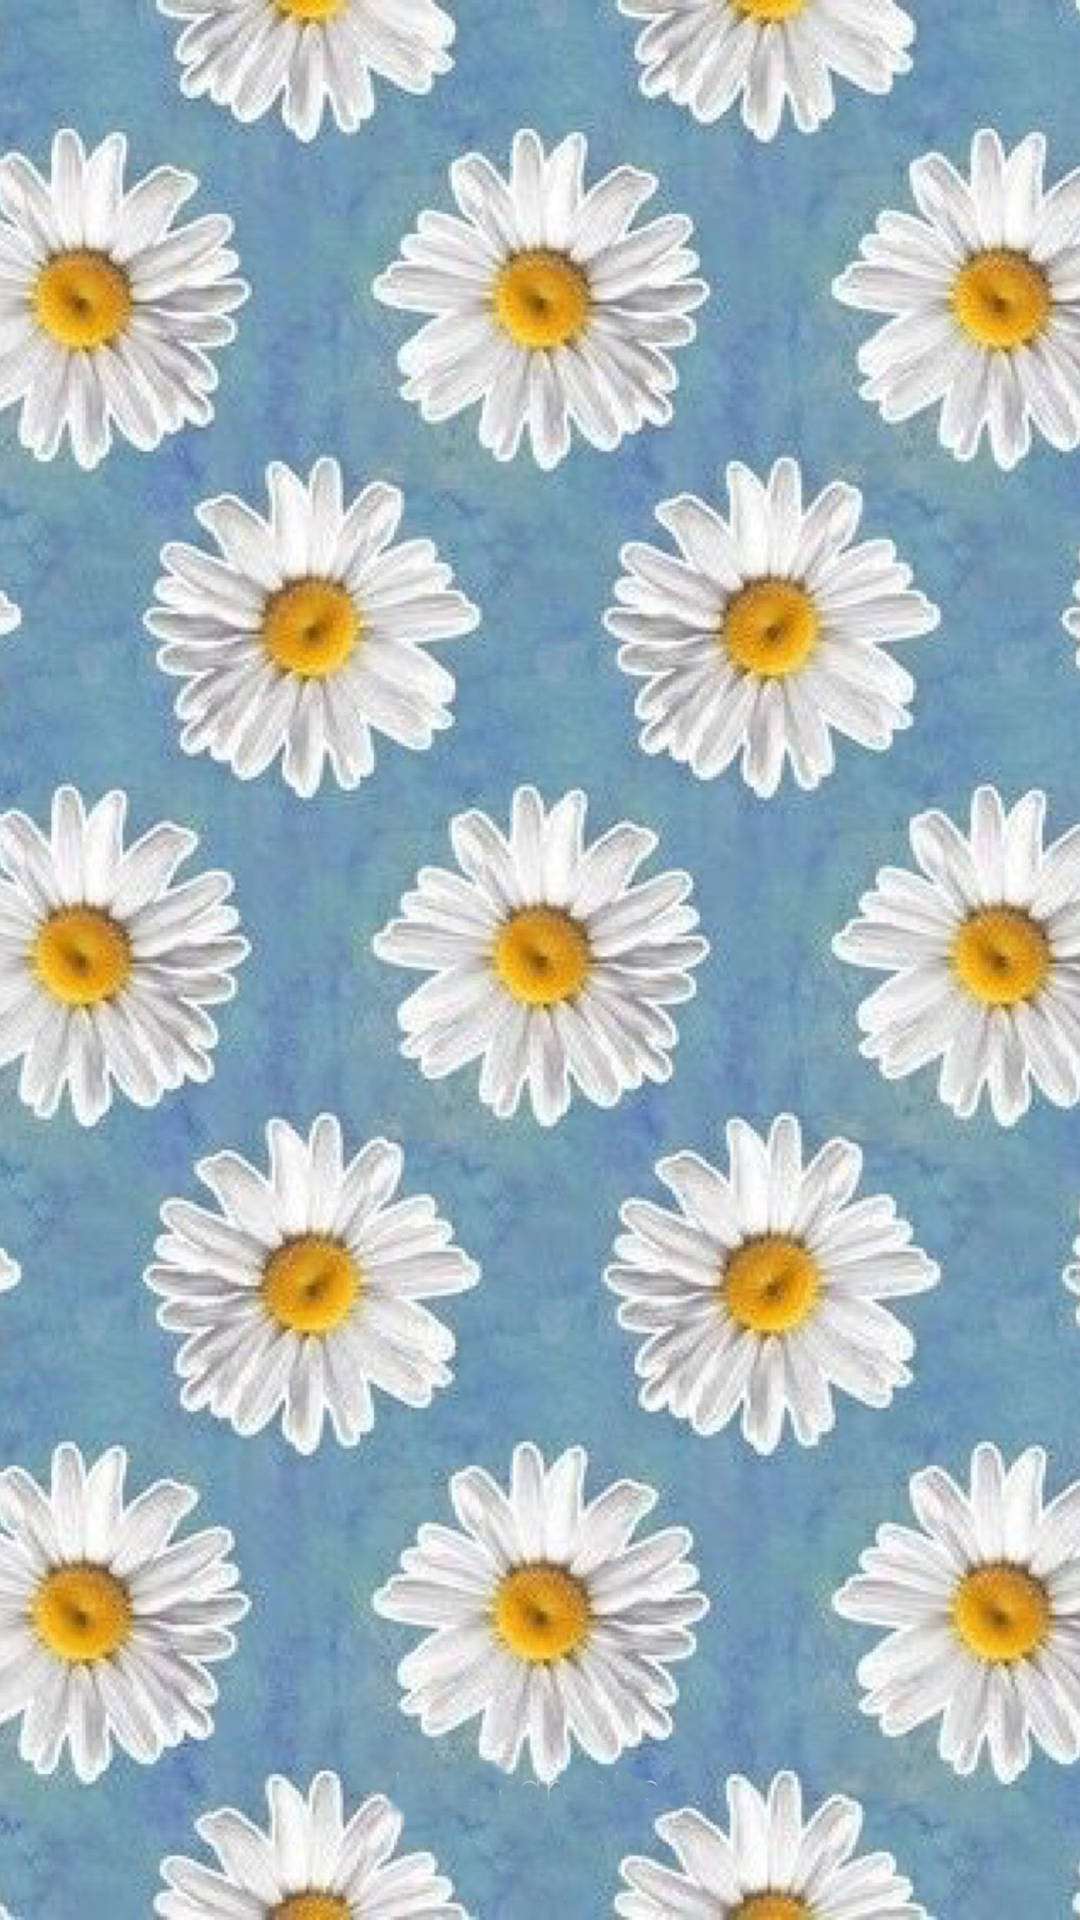 Daisy On Baby Blue Background Phone Wallpaper